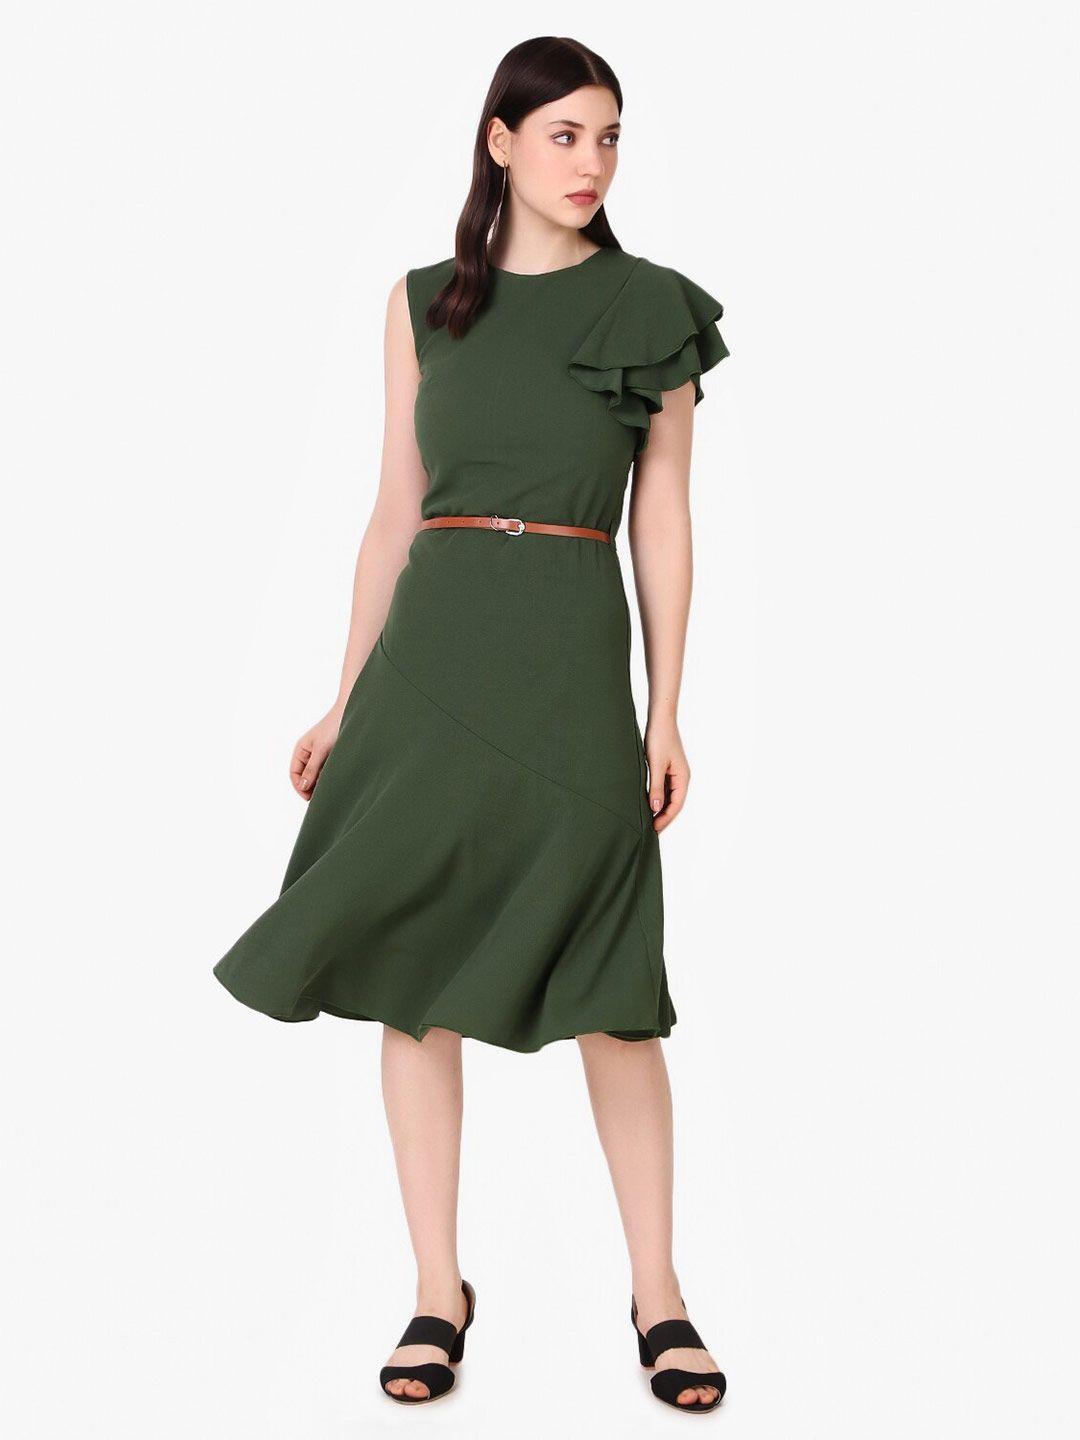 taggd round neck ruffled a-line dress with belt